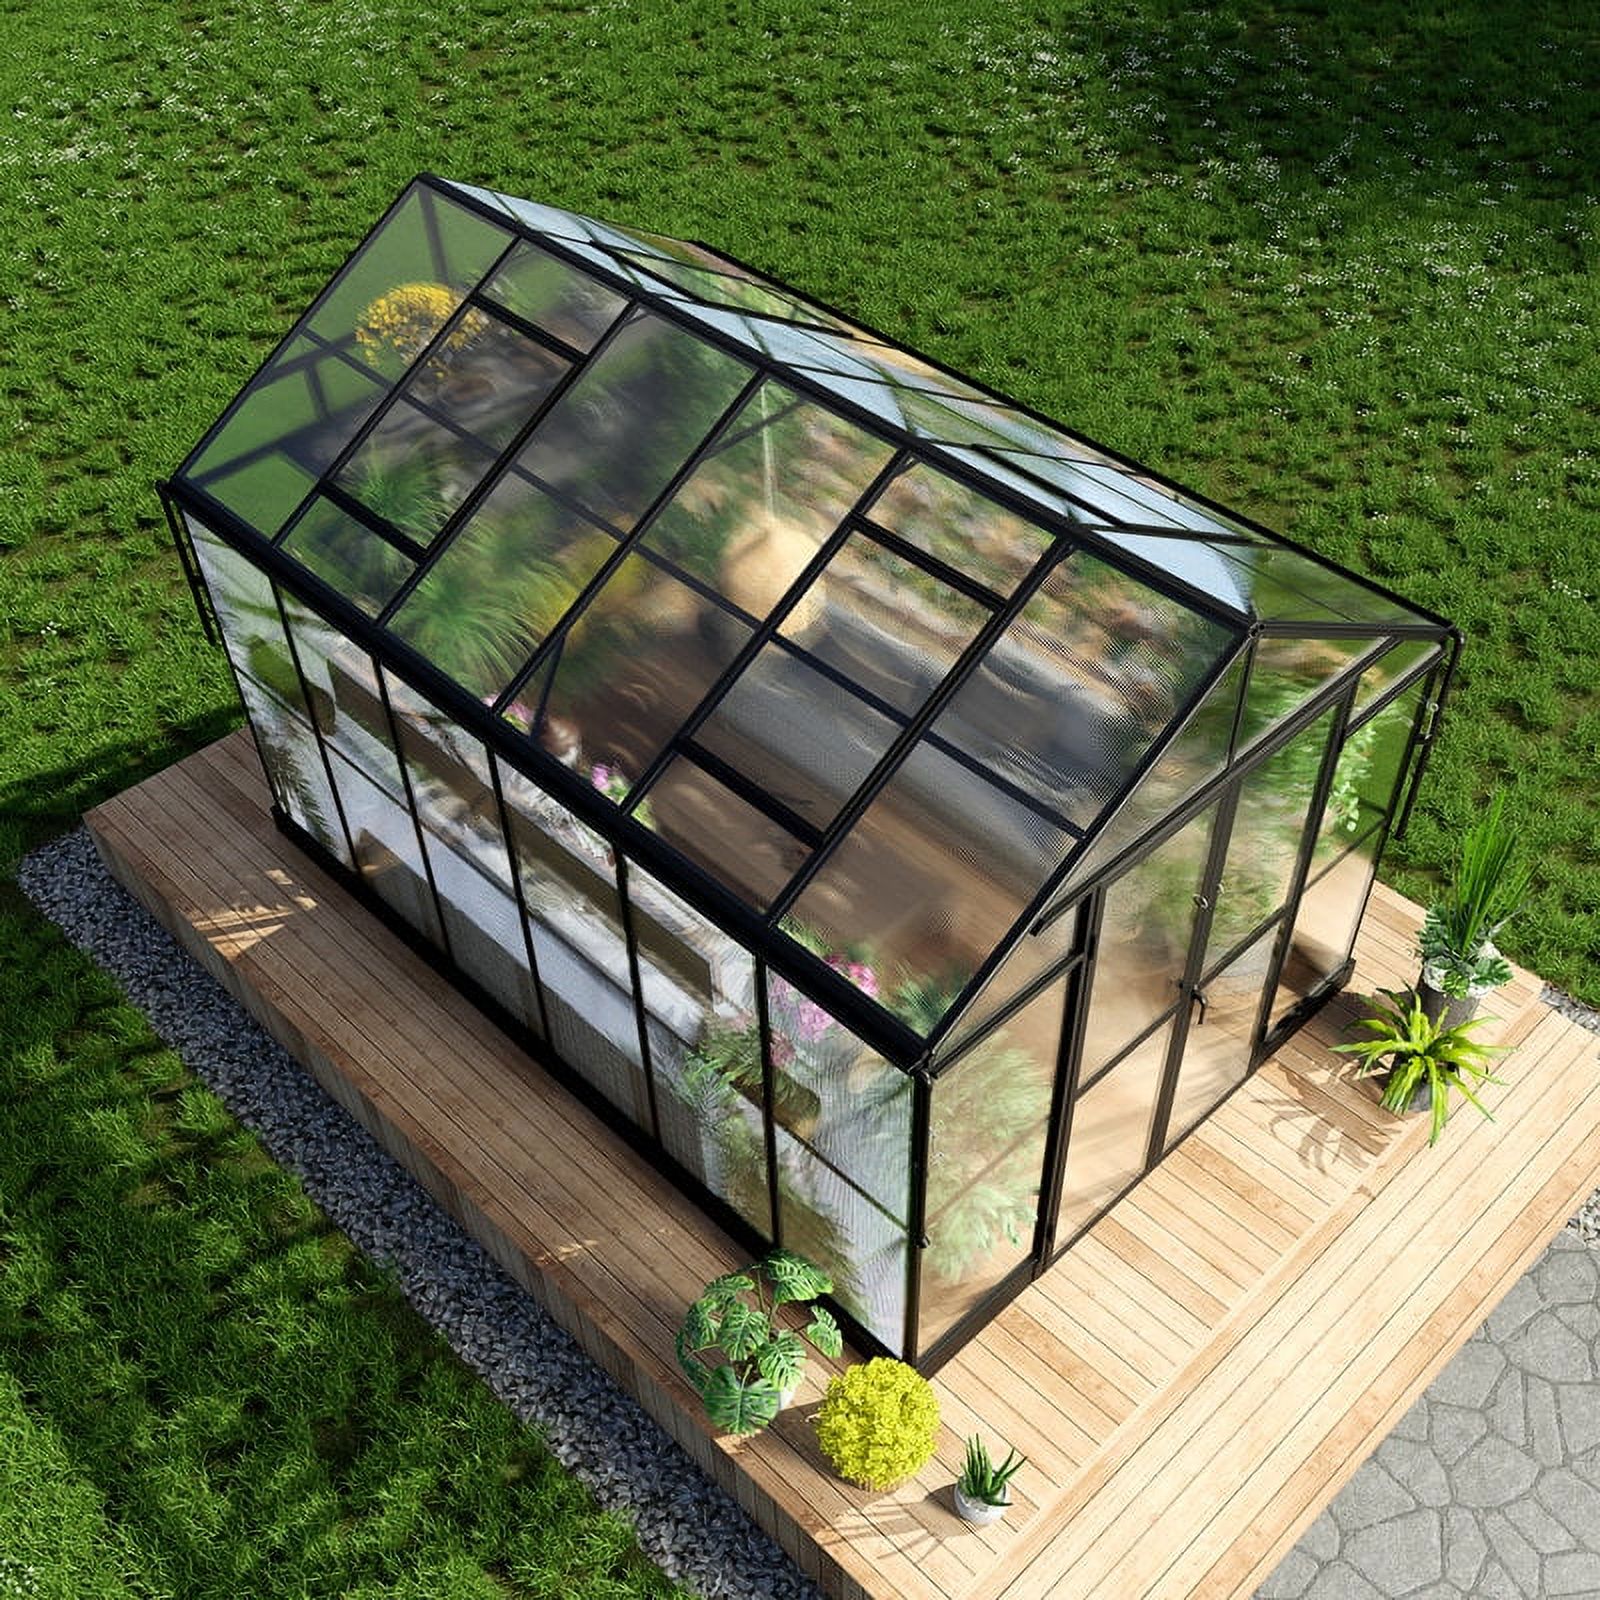 AMERLIFE 8x12x7.5 ft Polycarbonate Frame  Greenhouse Double Swing Doors 4 Vents 5.2FT Added Wall Height, Black - image 3 of 7